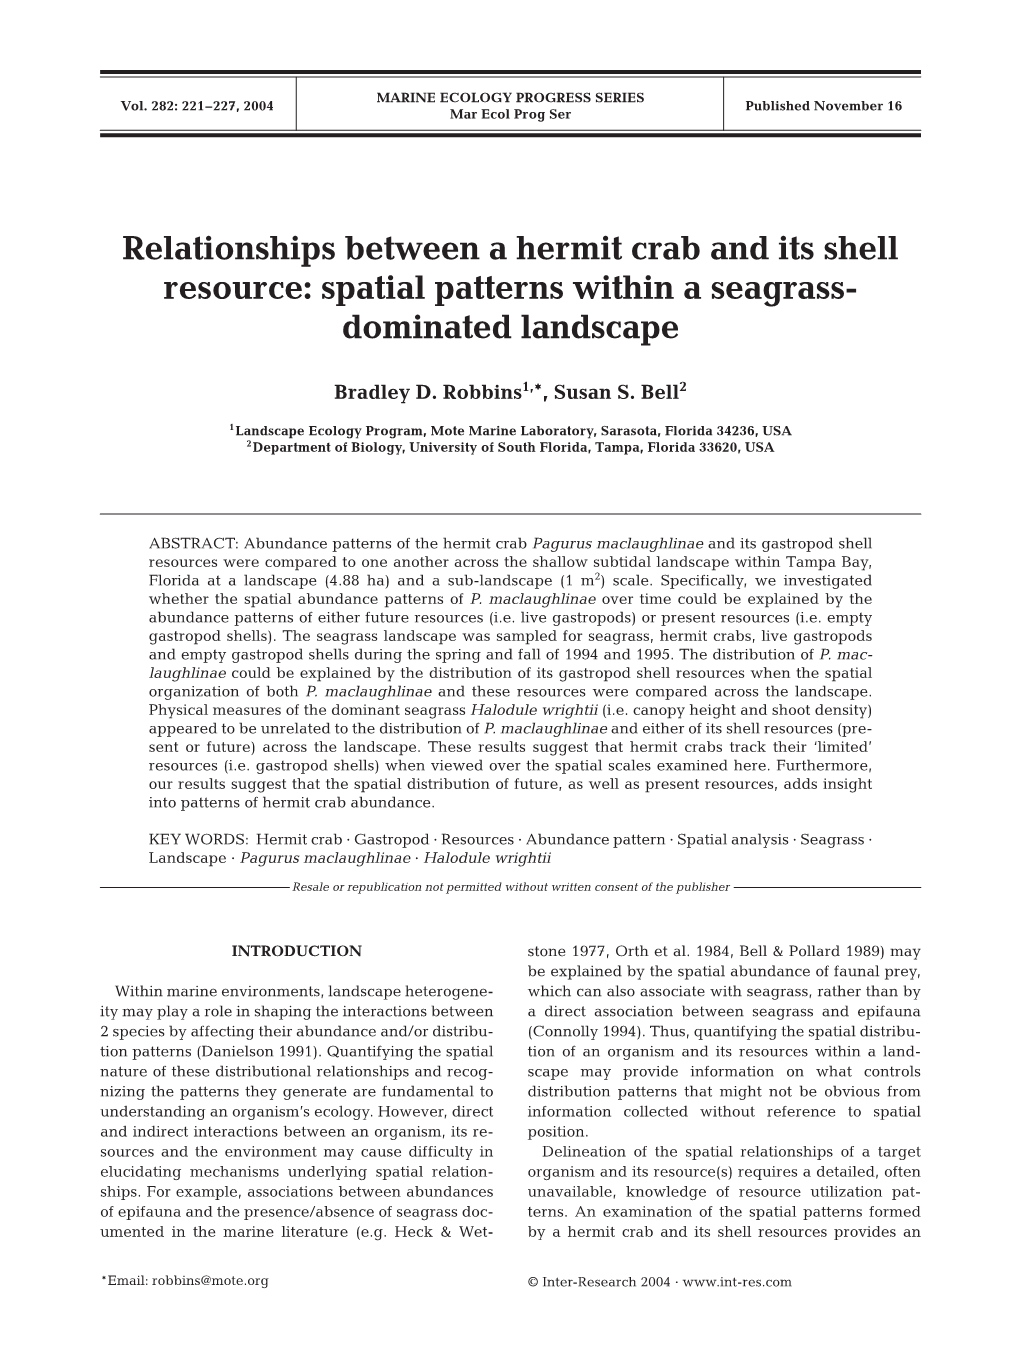 Relationships Between a Hermit Crab and Its Shell Resource: Spatial Patterns Within a Seagrass- Dominated Landscape